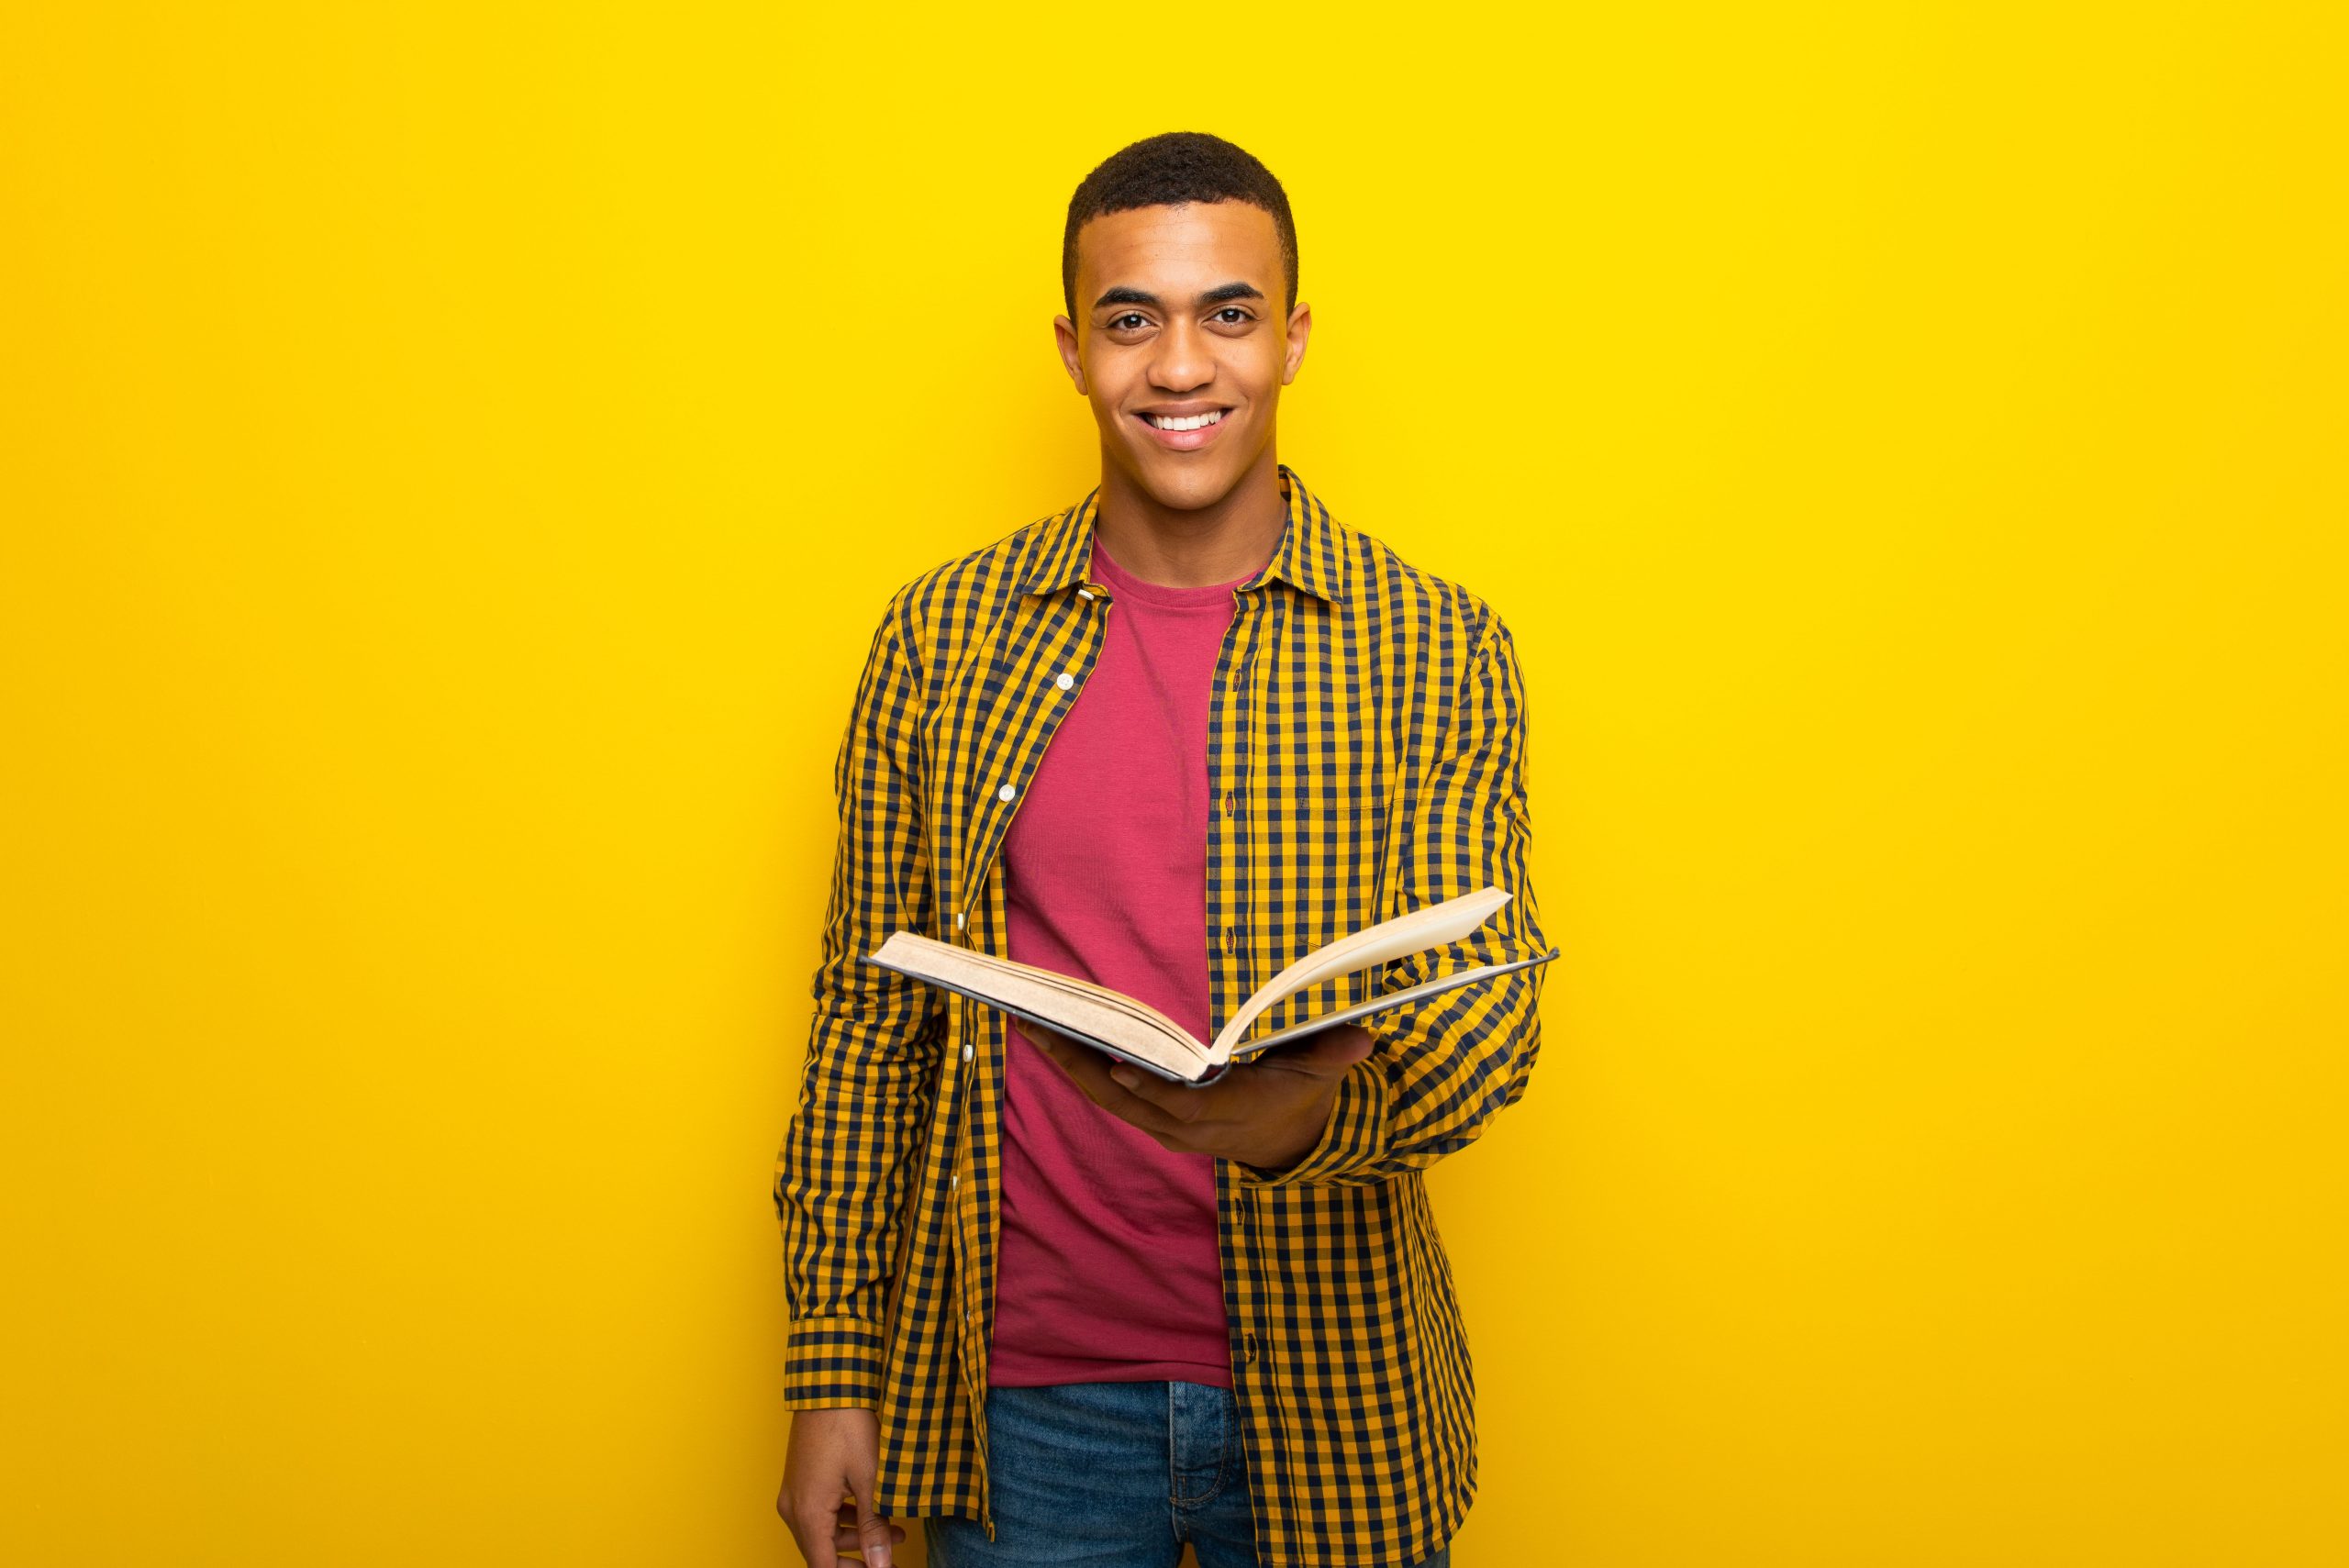 The young man is holding a textbook and standing against a yellow background.